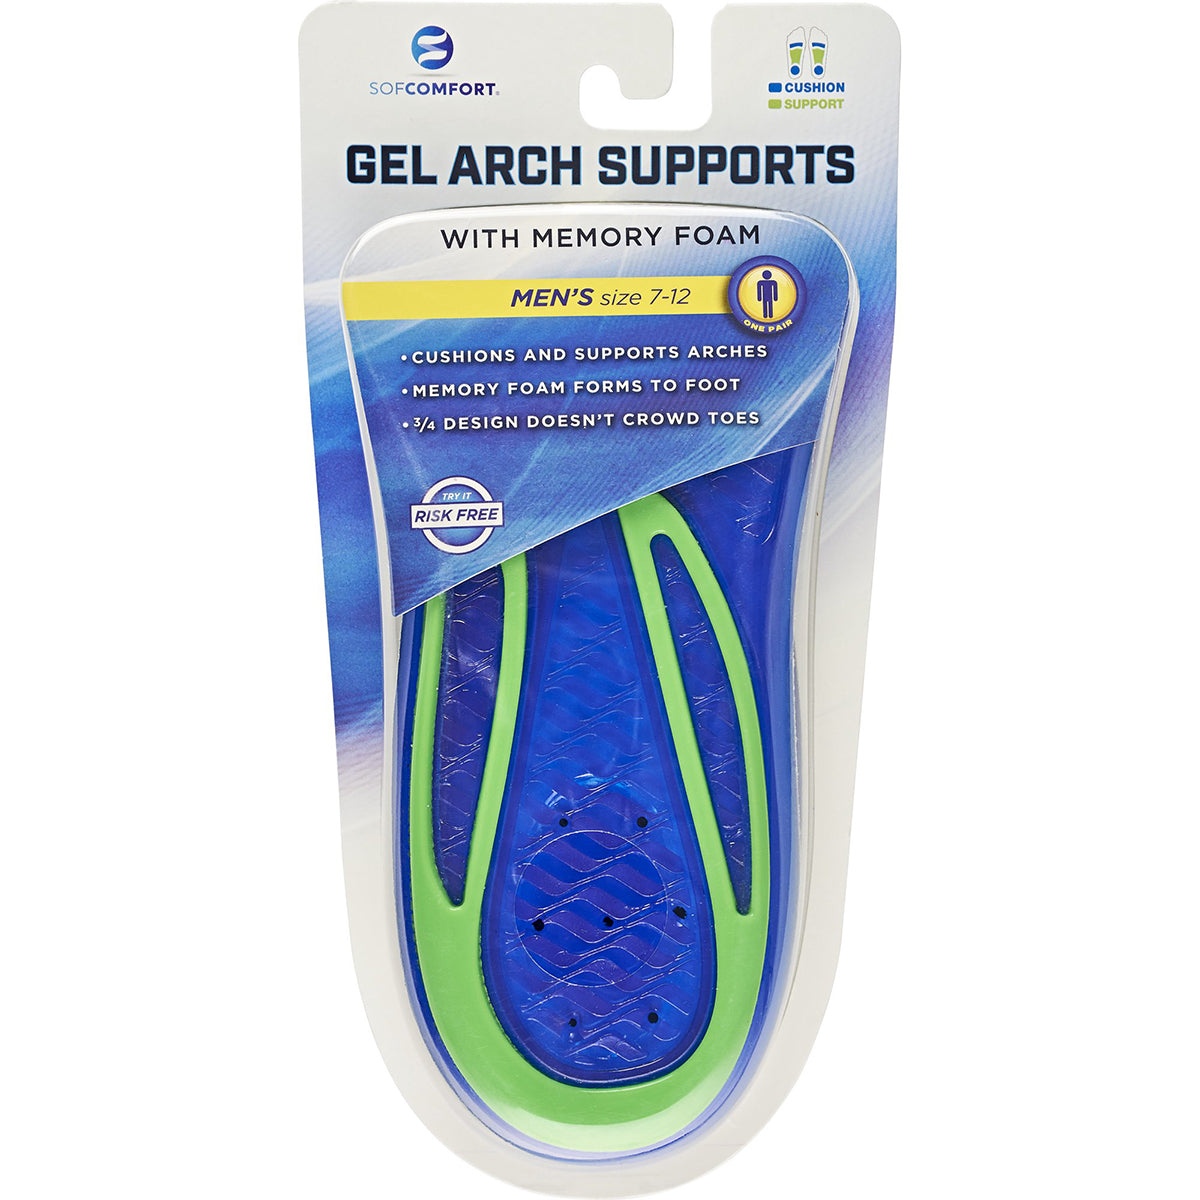 Sof Comfort Gel Arch Supports with Memory Foam - Men's 7-12 Sof Comfort